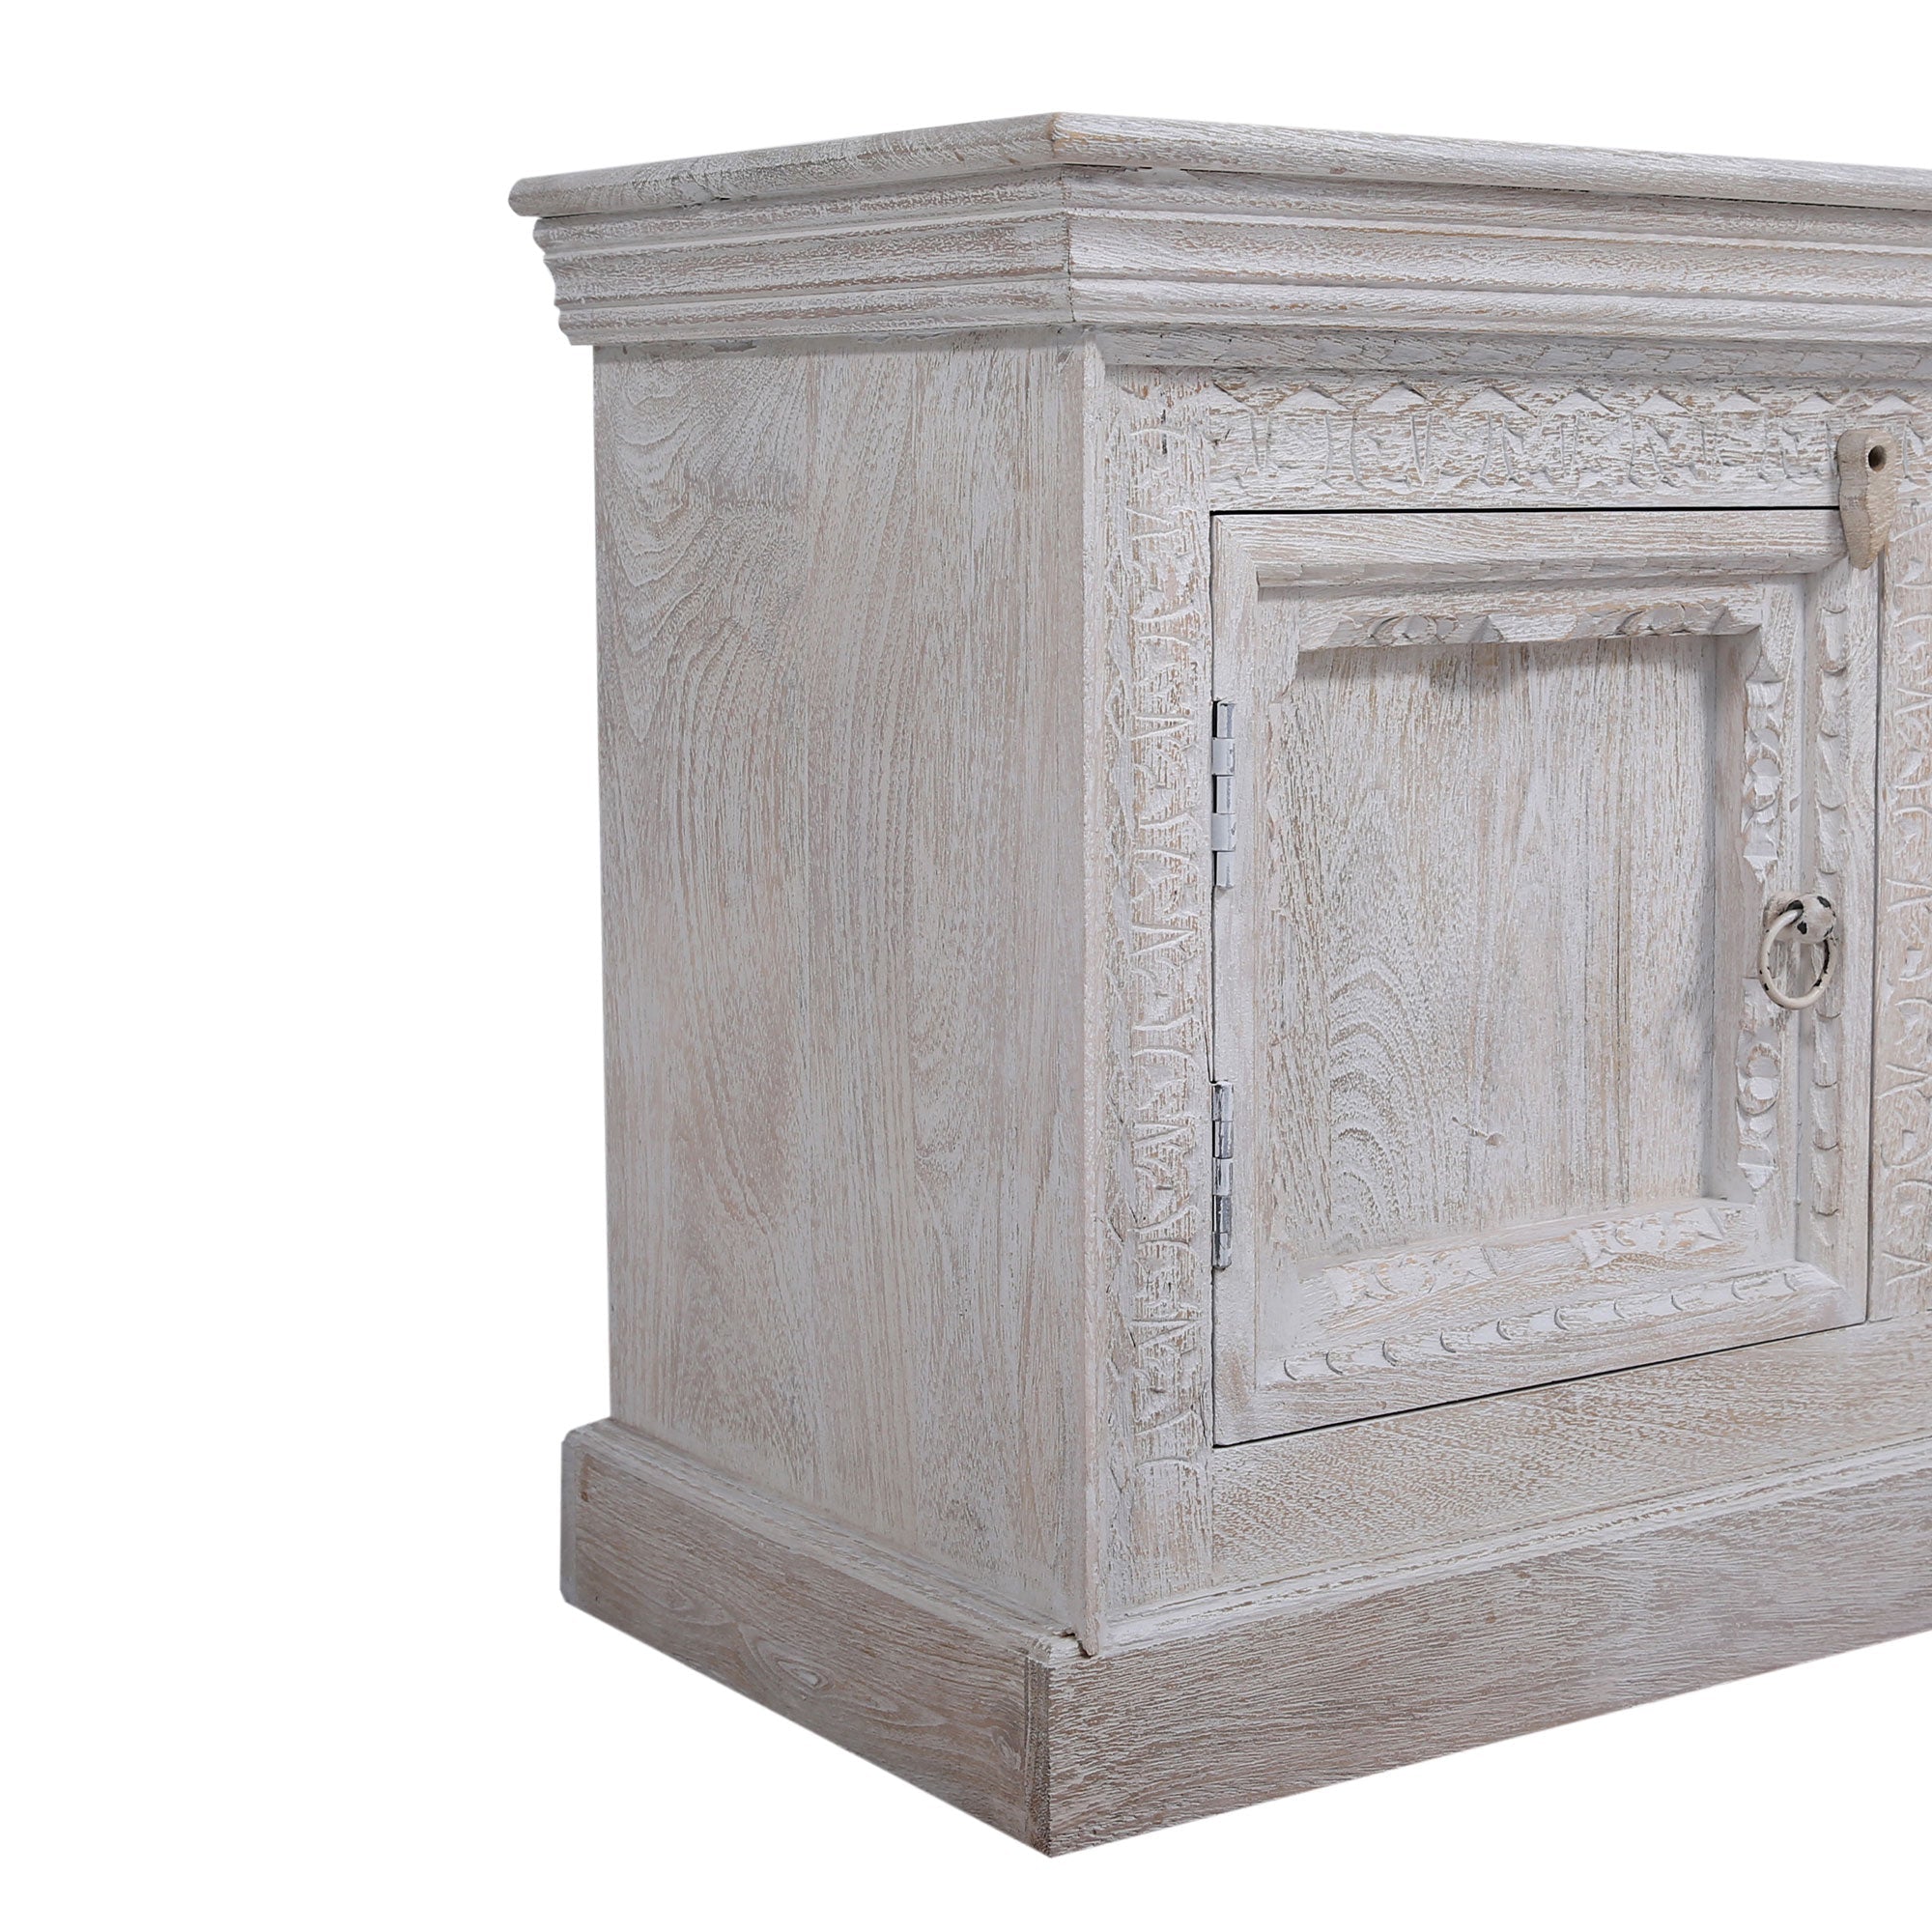 Mahala Nomad Wooden Media Unit in Distressed White Finish in Media Units by VMInnovations